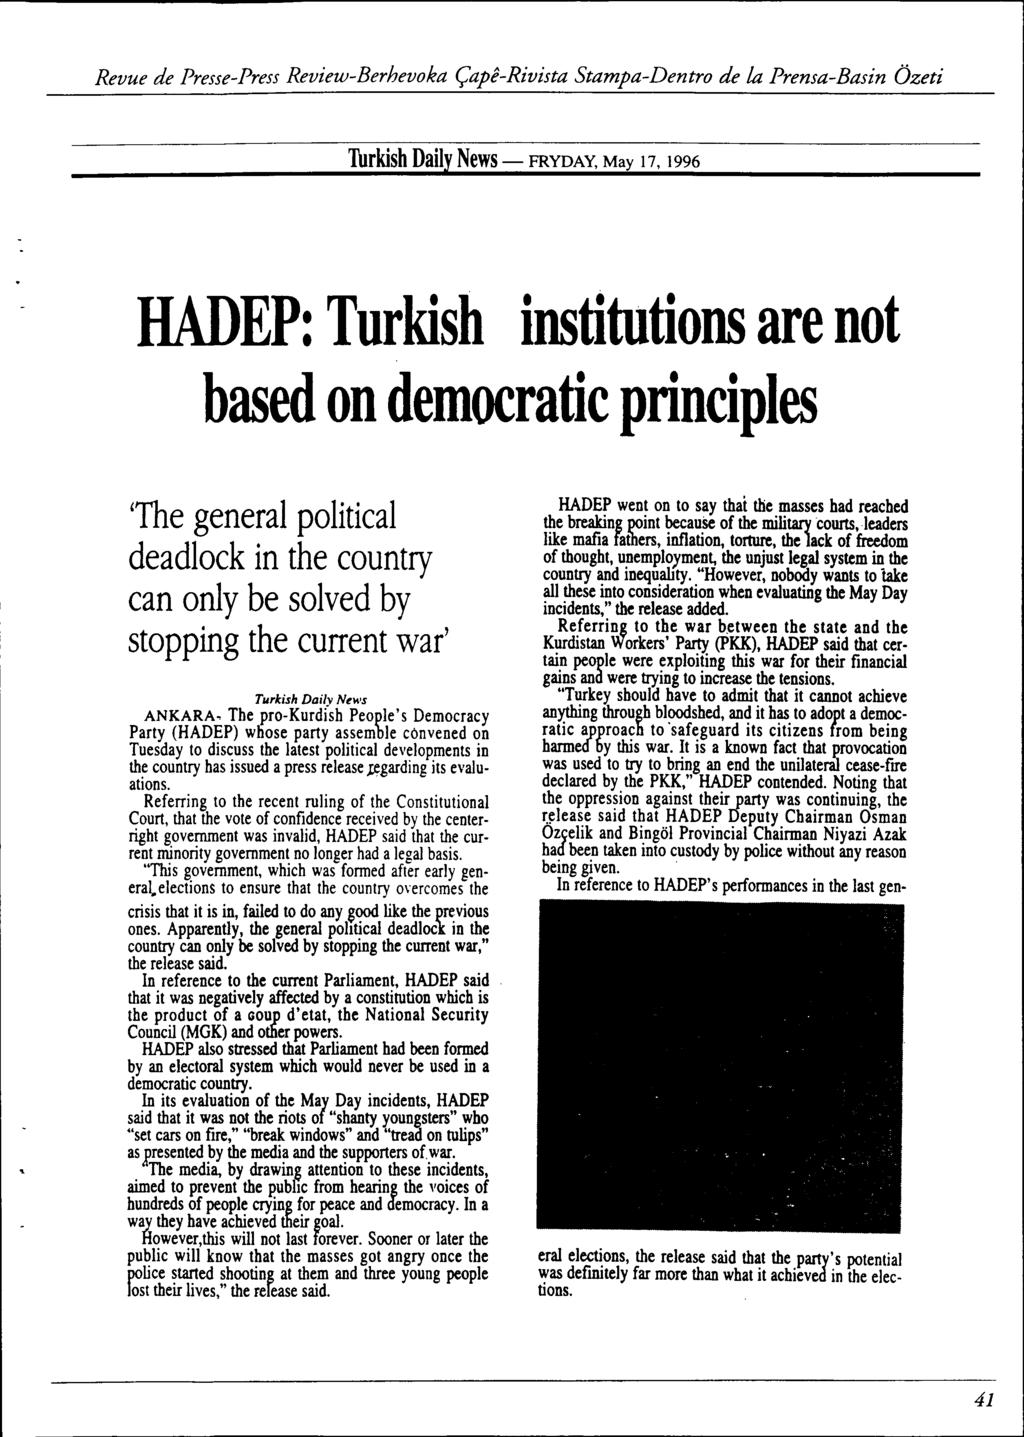 Thrkish Daily News - FRYDAY, May 17, 1996 HADEP: Turkish institutions are not based on democratic principles 'The general political deadlock in the country can only be solved by stopping the current